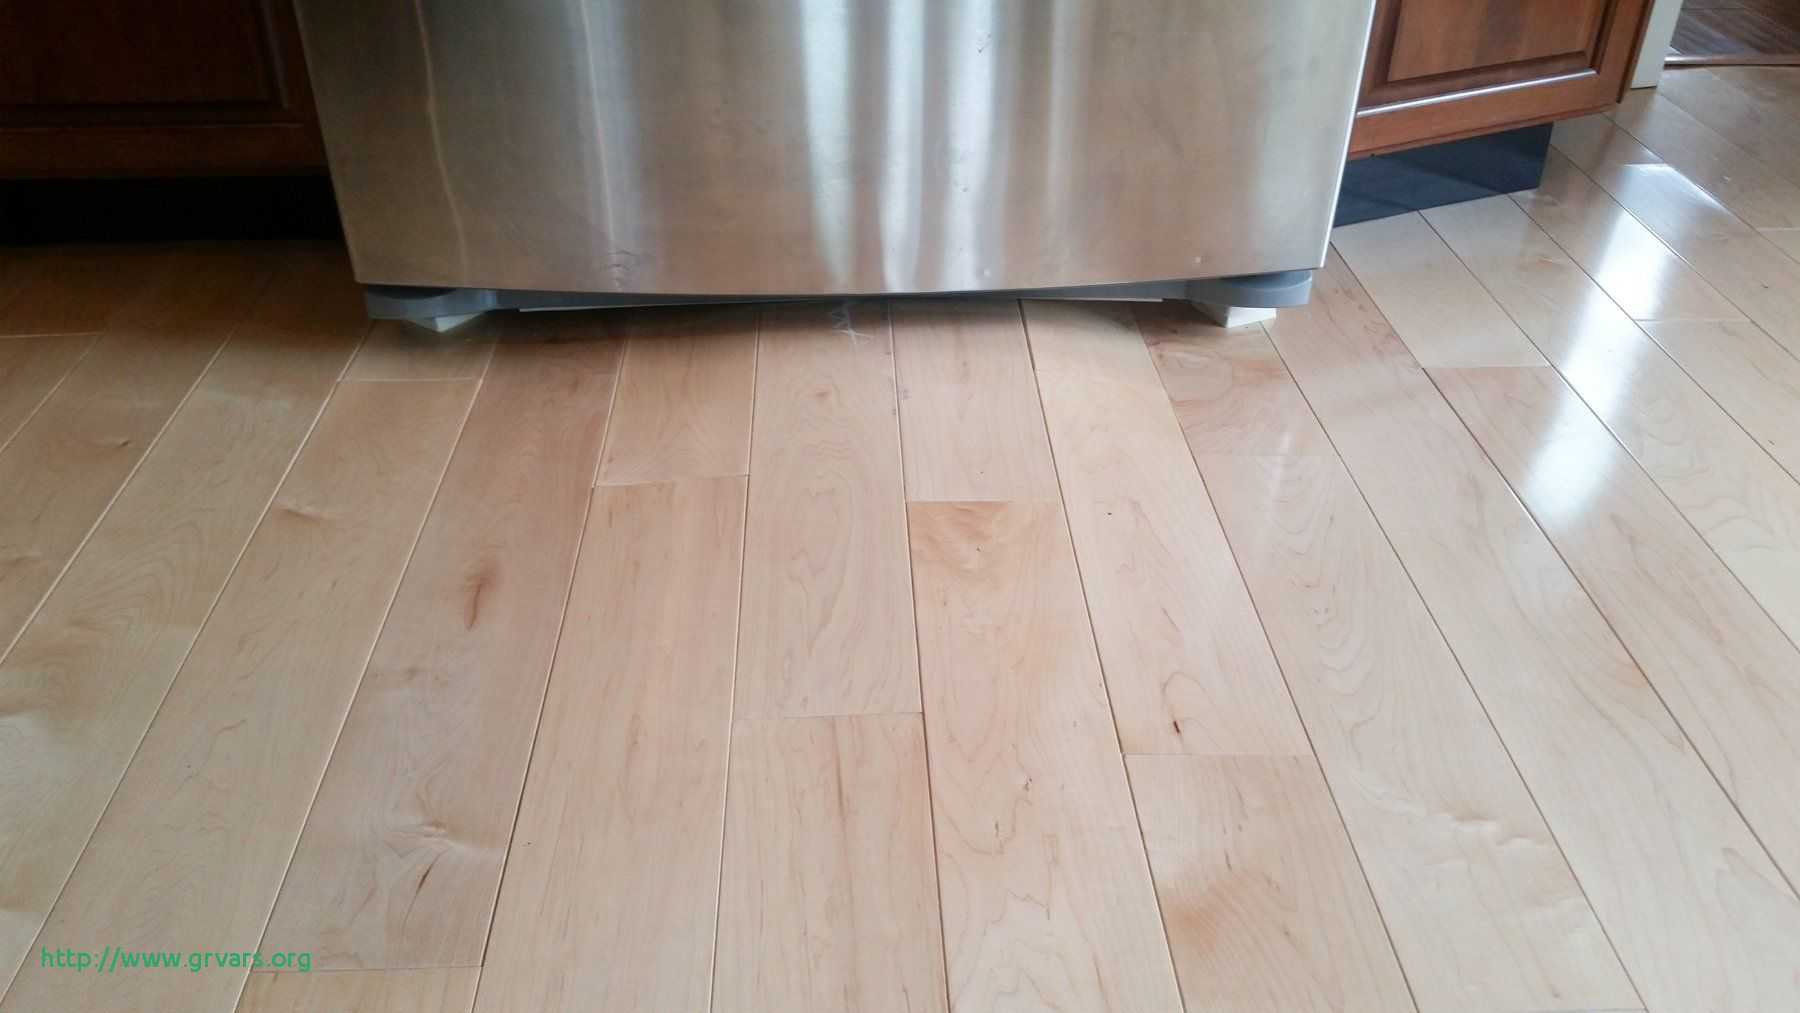 cleaning engineered hardwood floors with vinegar and water of 23 nouveau how to clean engineered wood floors with vinegar ideas blog throughout how to clean engineered wood floors with vinegar unique easy tips removing water damage from wood